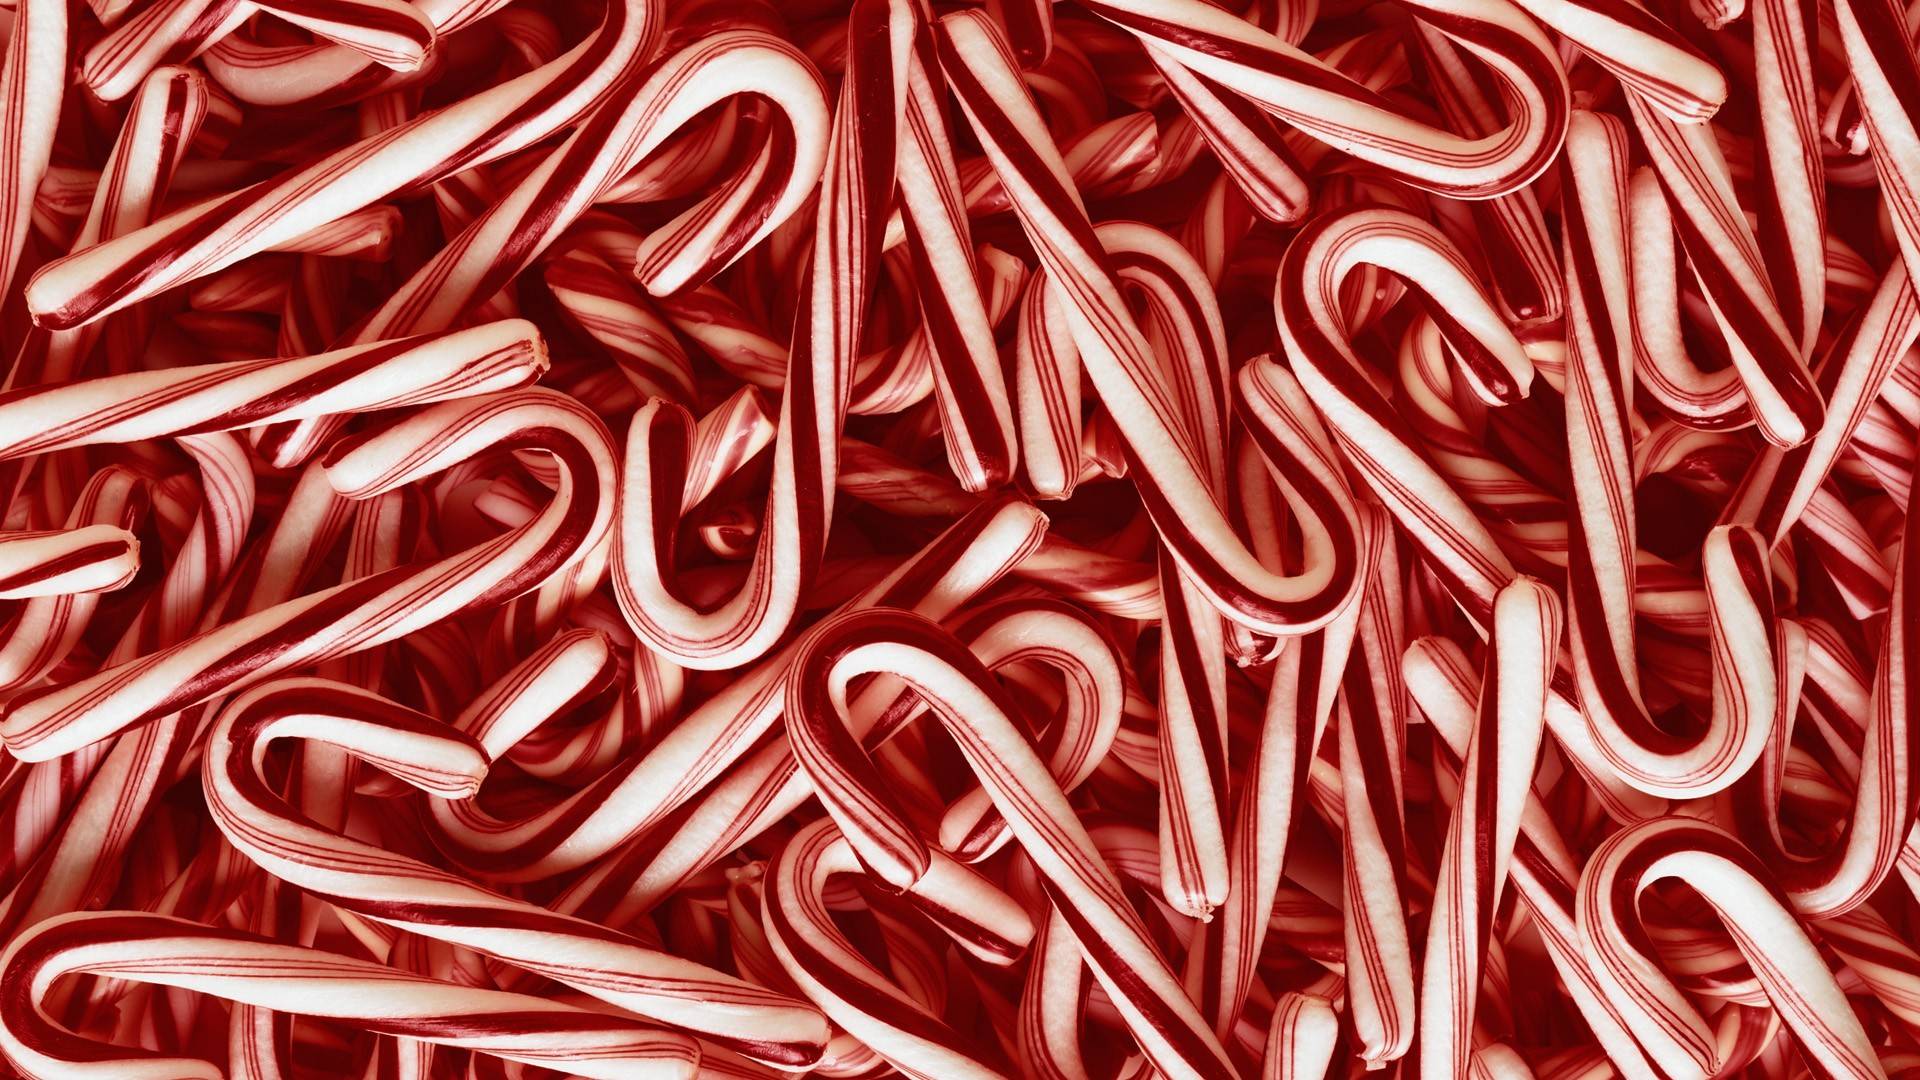 Candy Canes 19201080 Wallpaper 1666040